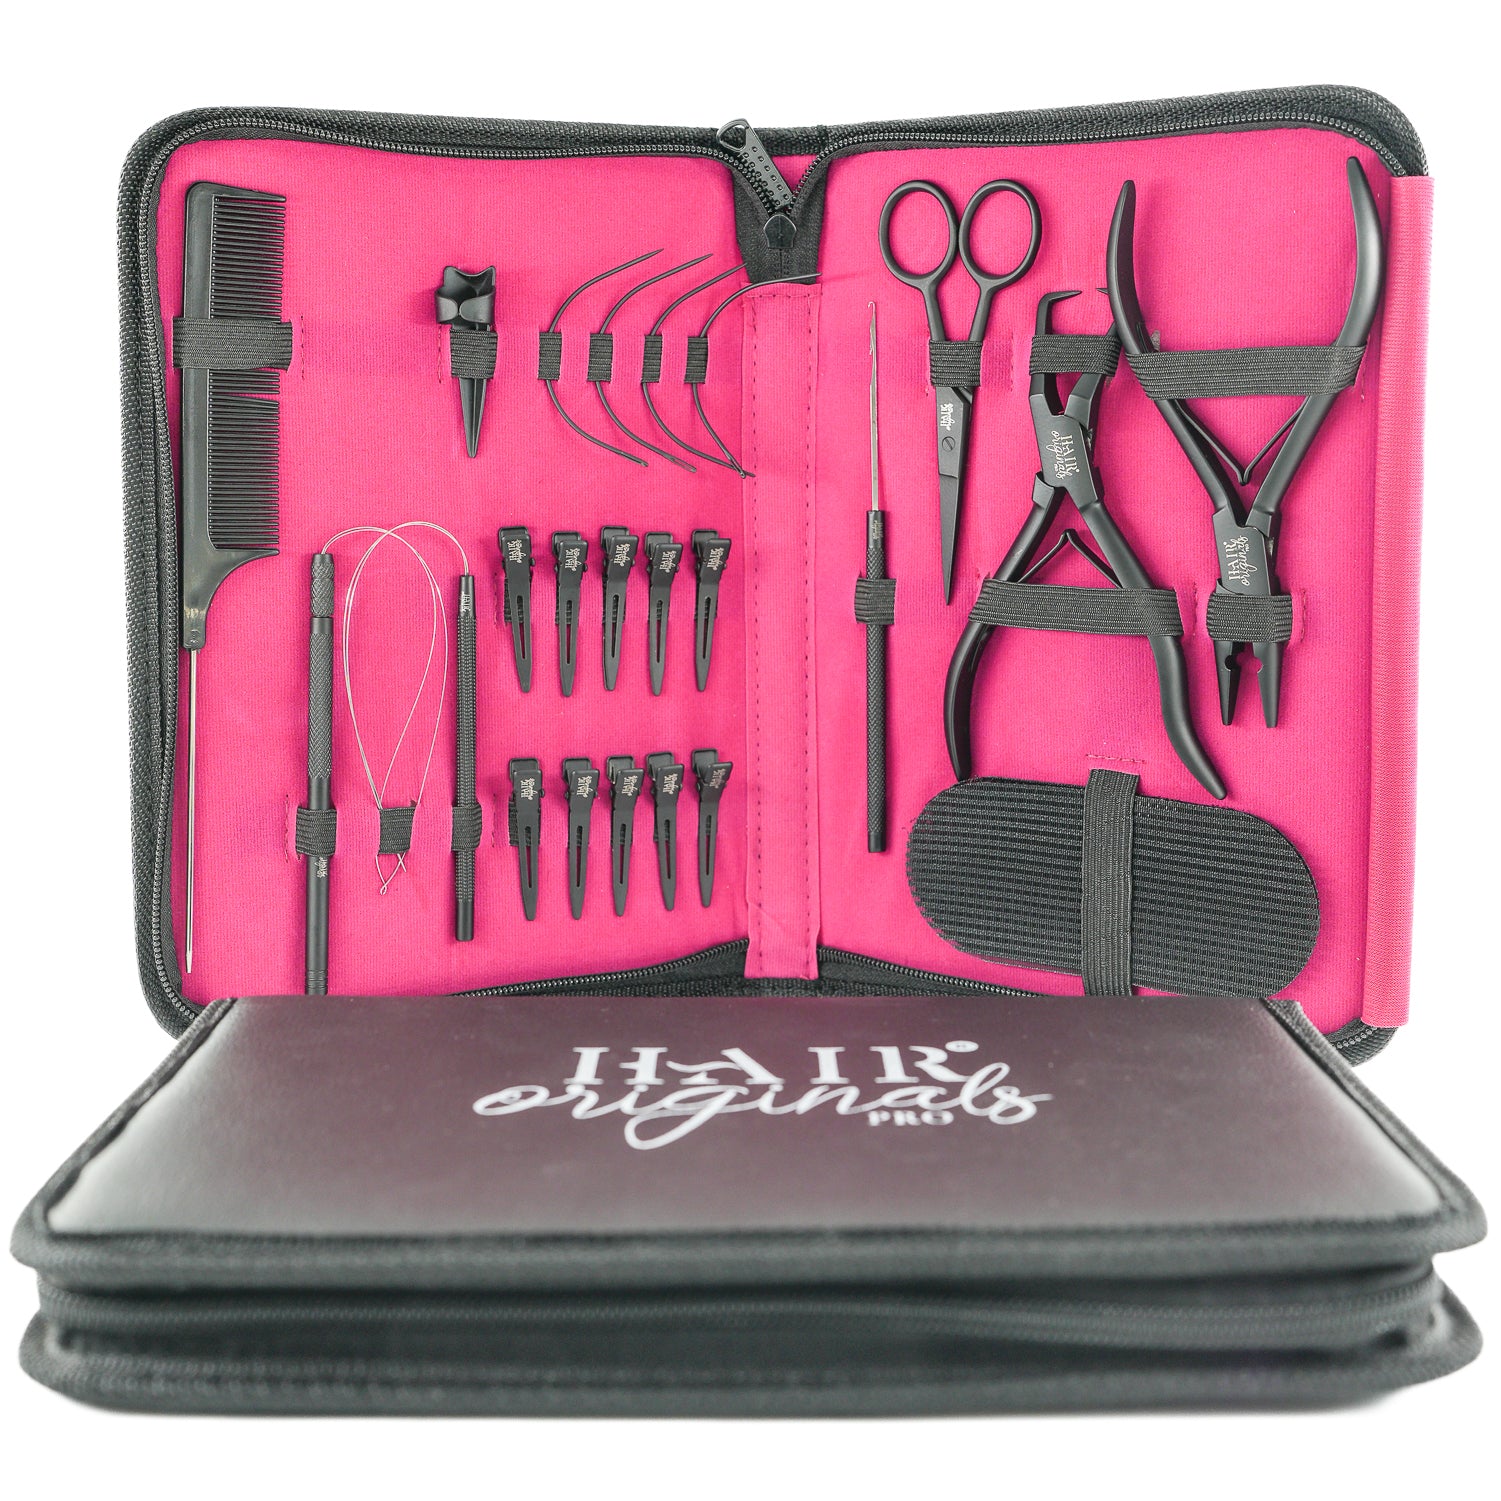 Professional Hair Extensions Toolkit